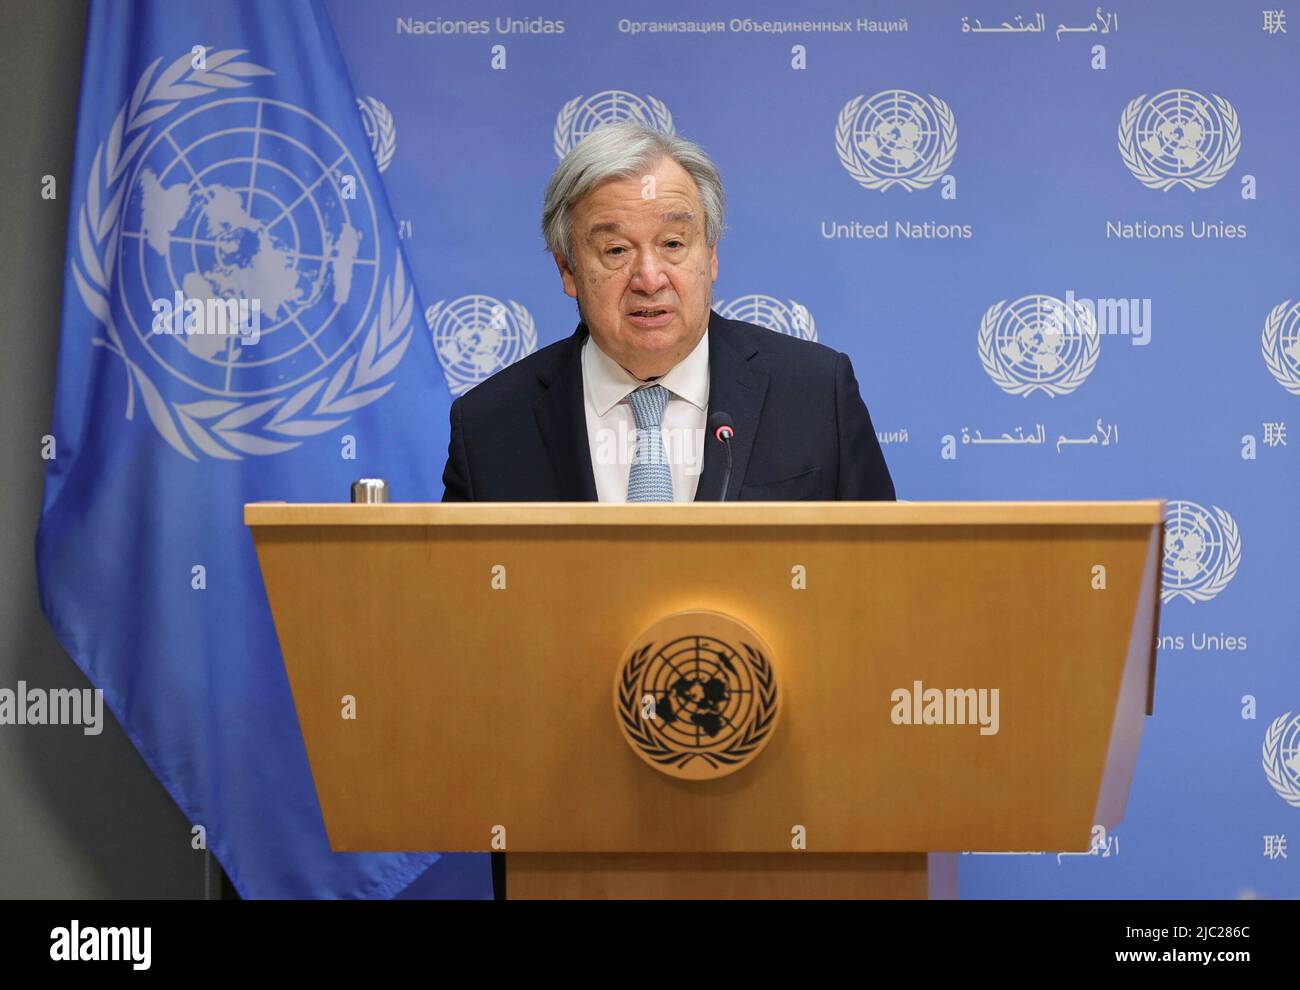 United Nations, New York, USA, June 08, 2022 - Secretary-General Antonio Guterres brief reporters on the second report of the Global Crisis Response Group on the impact of the war in Ukraine on the food, fuel, and finance sectors Today at the UN Headquarters in New York City. Photo: Luiz Rampelotto/EuropaNewswire PHOTO CREDIT MANDATORY. Stock Photo